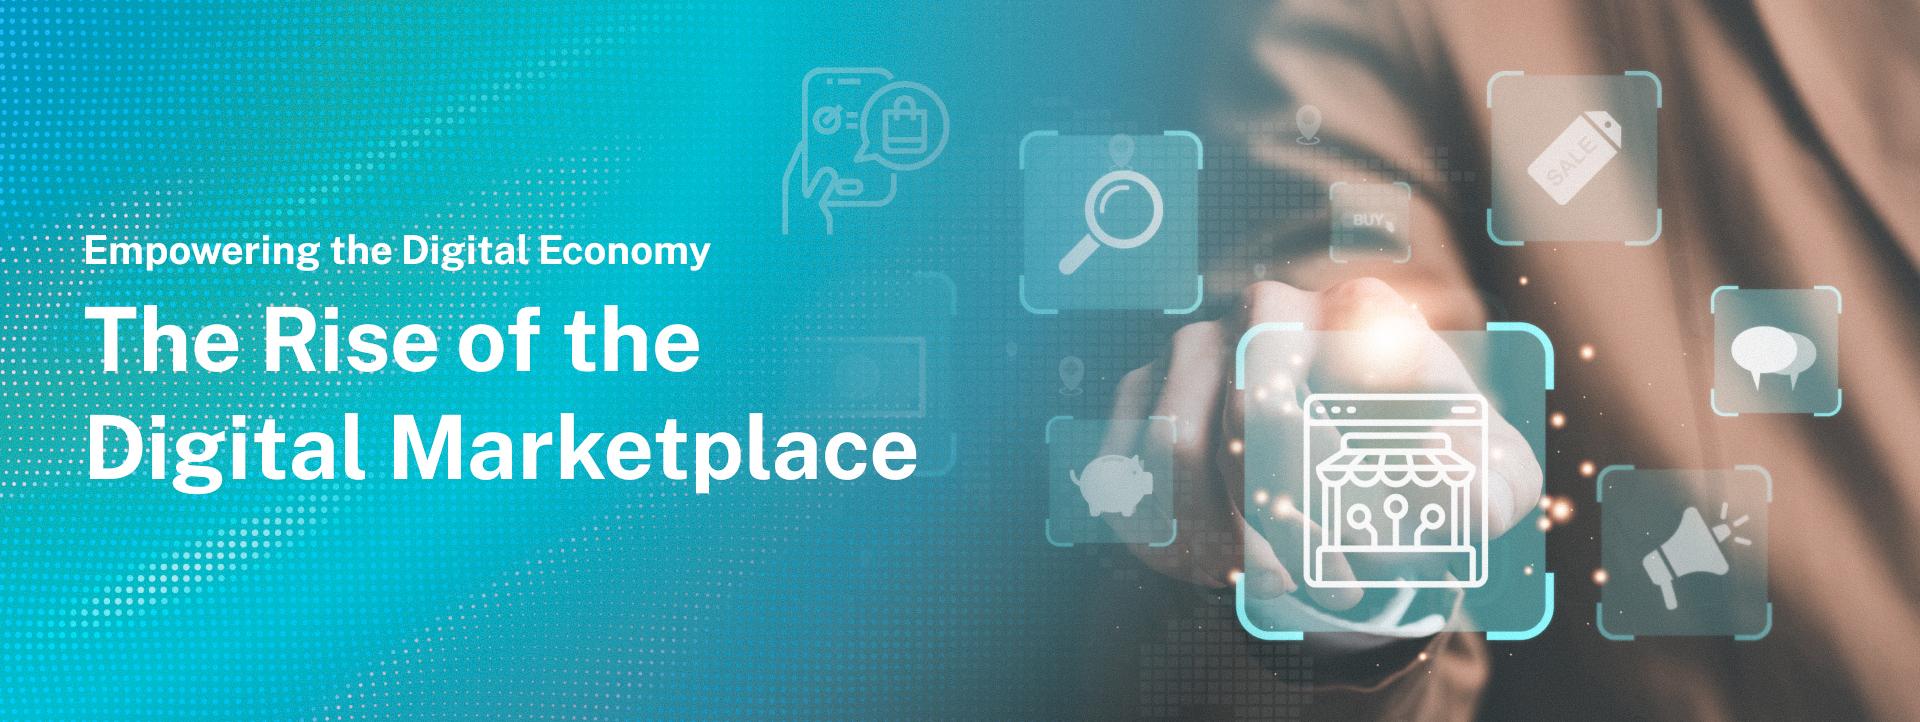 Empowering the Digital Economy: The Rise of the Digital Marketplace